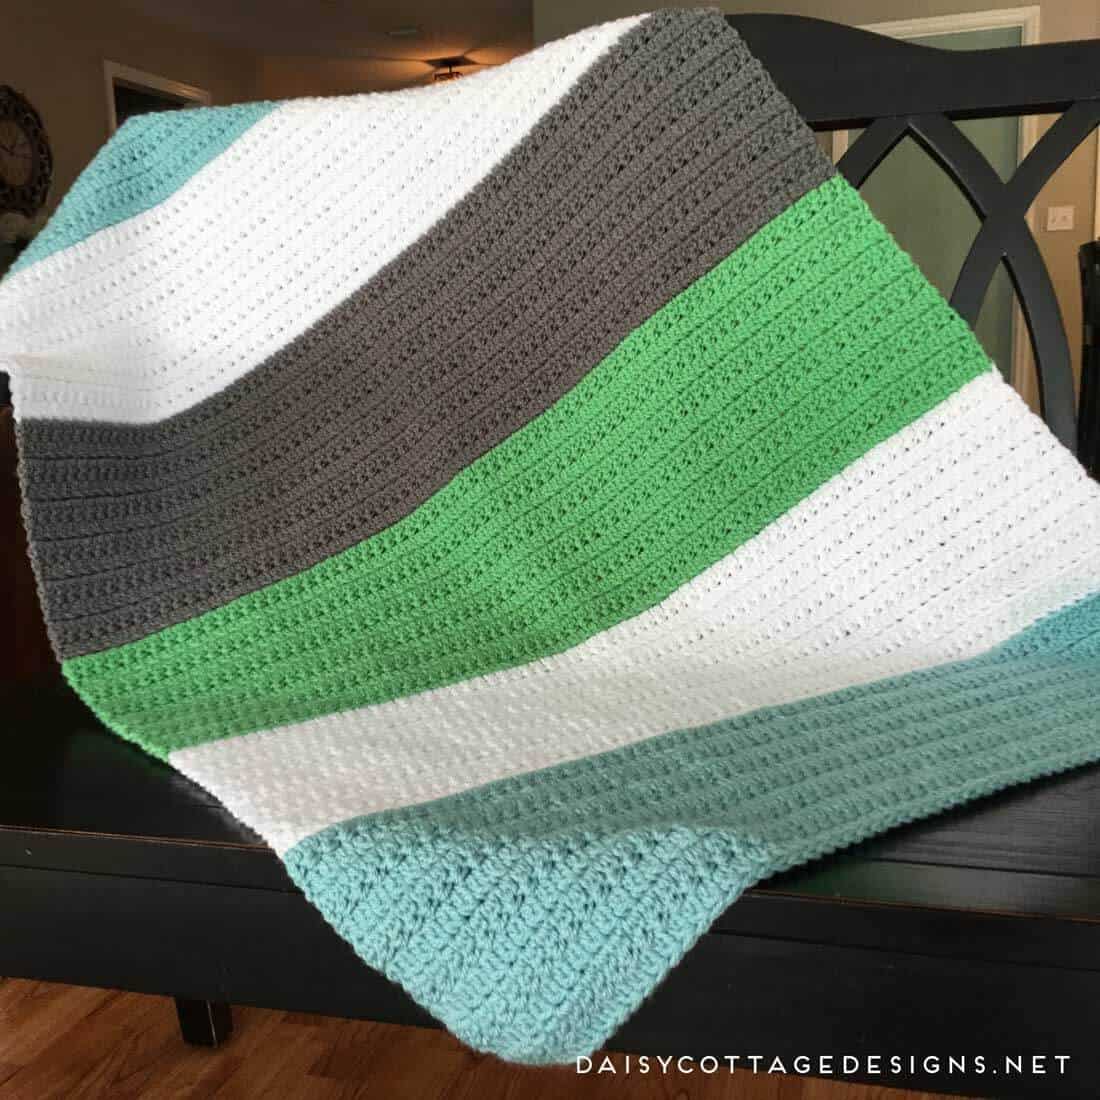 Crochet Blanket Pattern | Crochet Baby Blanket | Free Crochet Pattern | Color Block Crochet Blanket | Use this quick and easy crochet blanket pattern from Daisy Cottage Designs to create a gorgeous color block blanket for your next project.